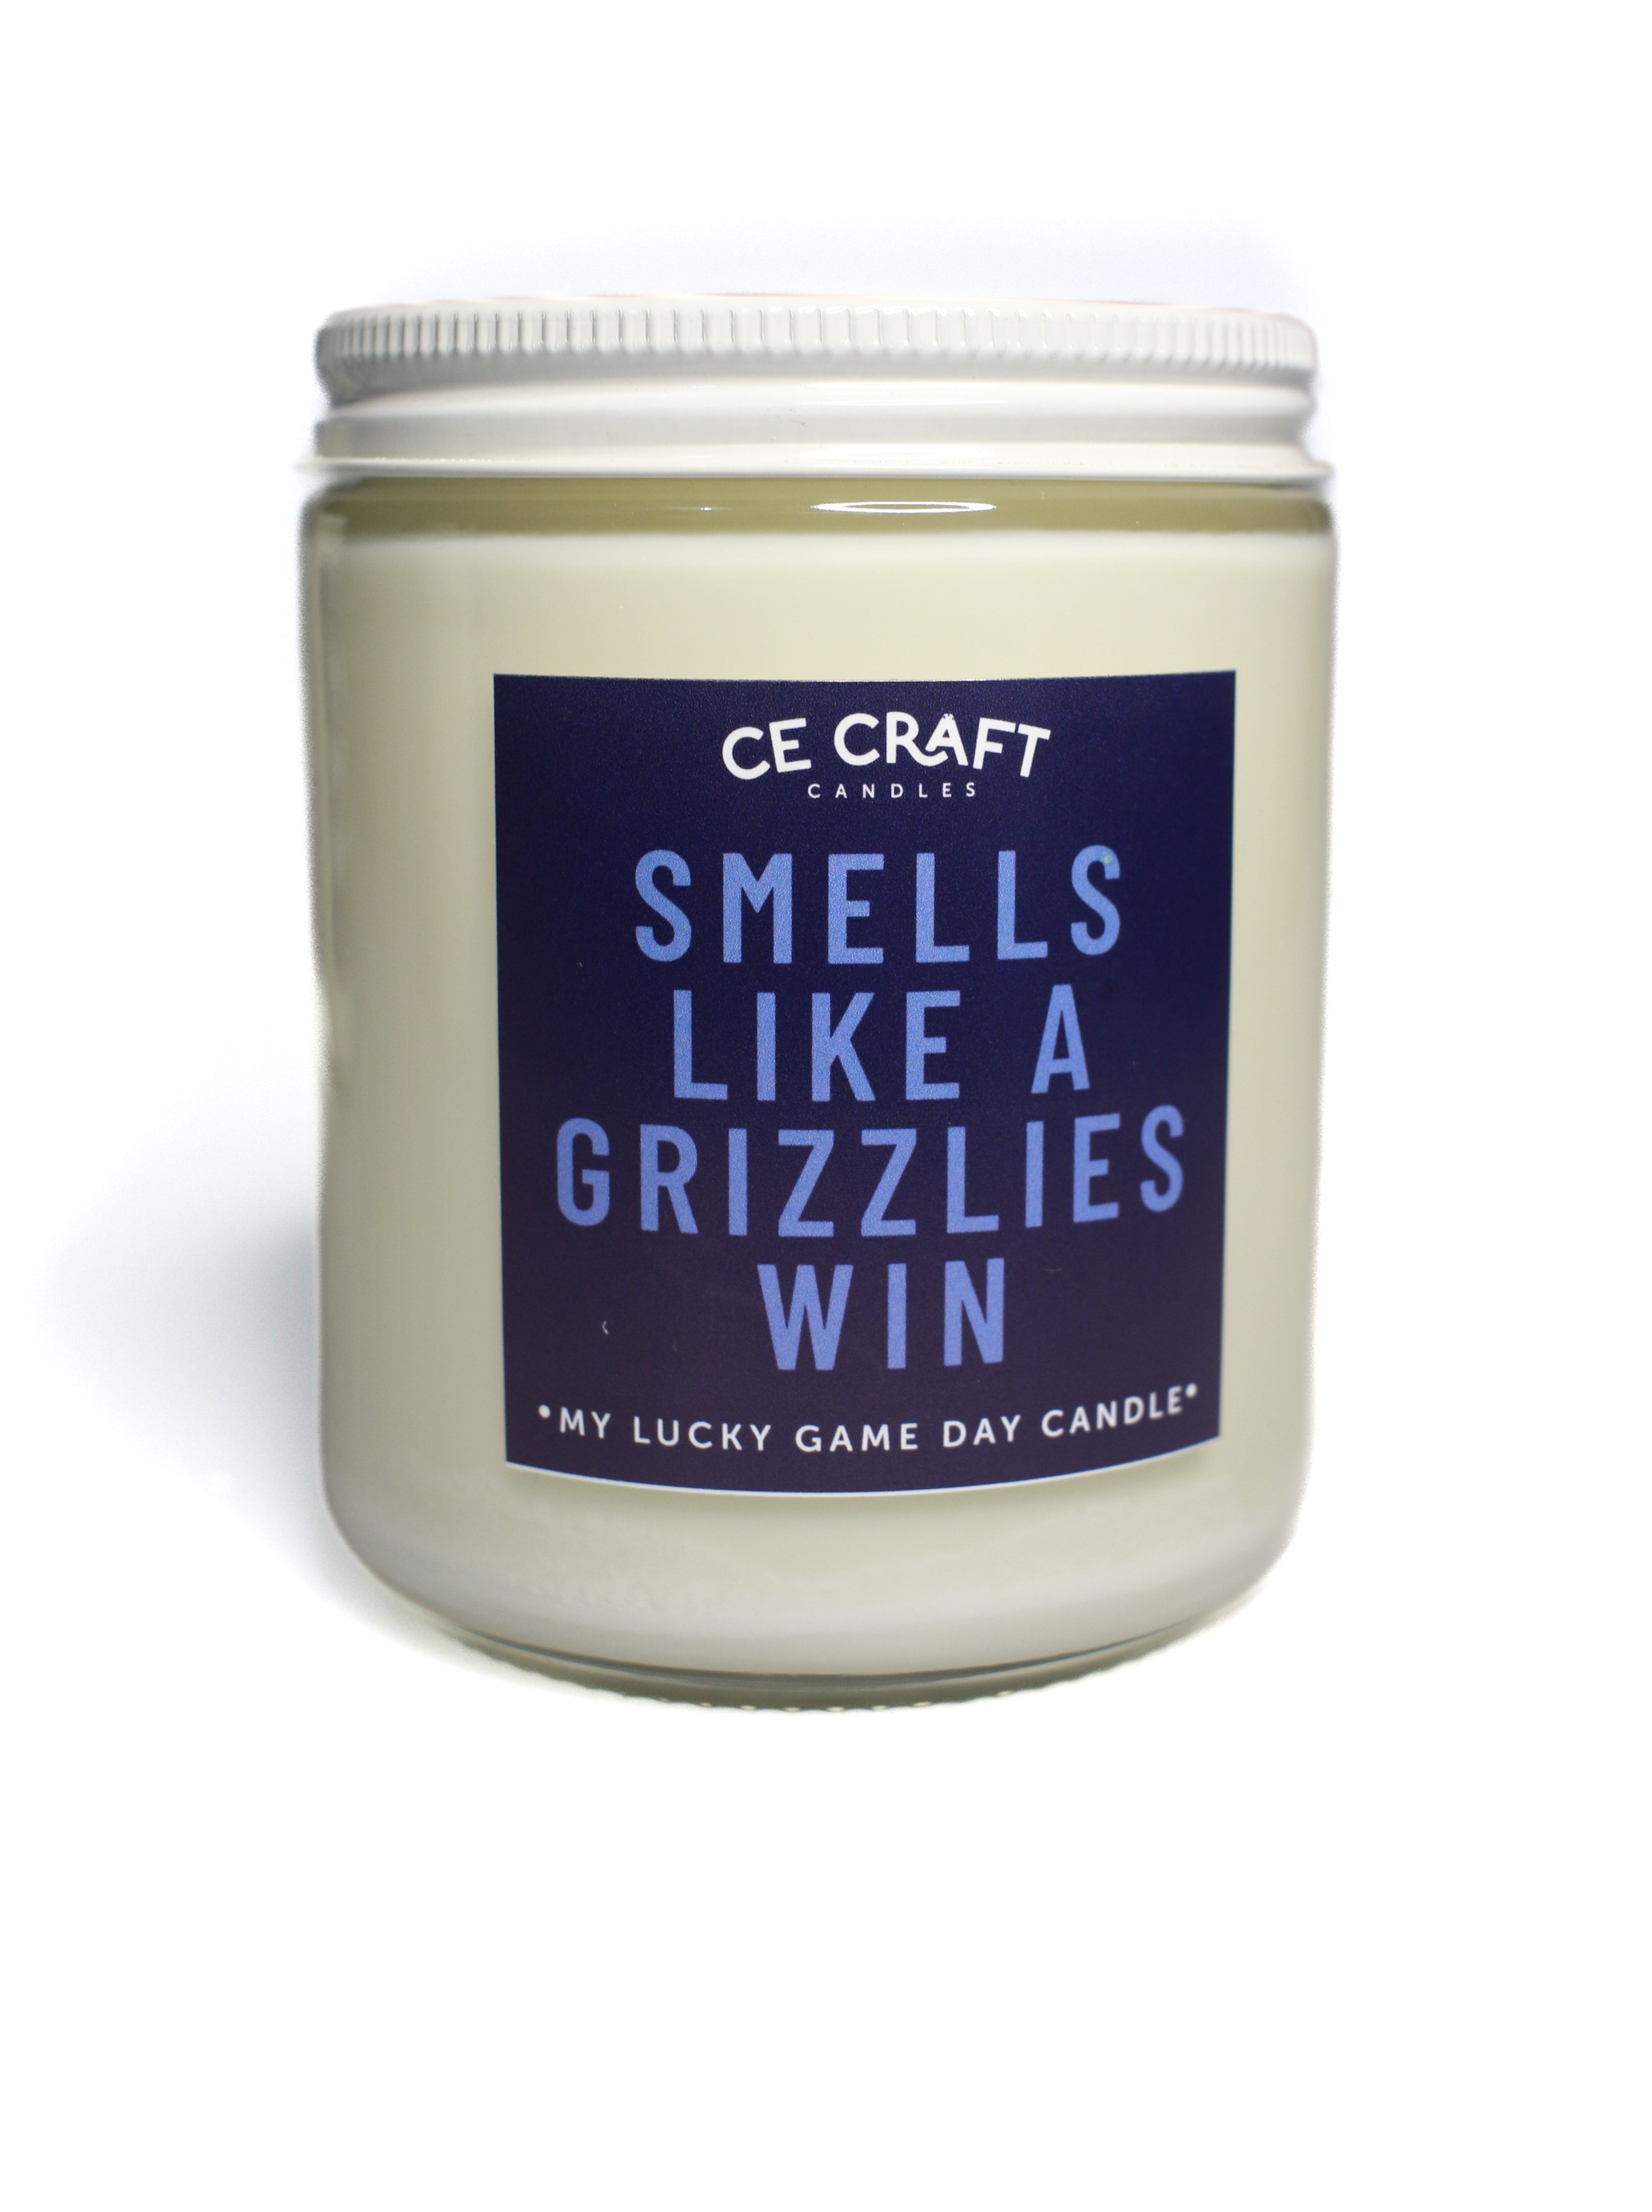 Smells Like a Grizzlies Win Candle